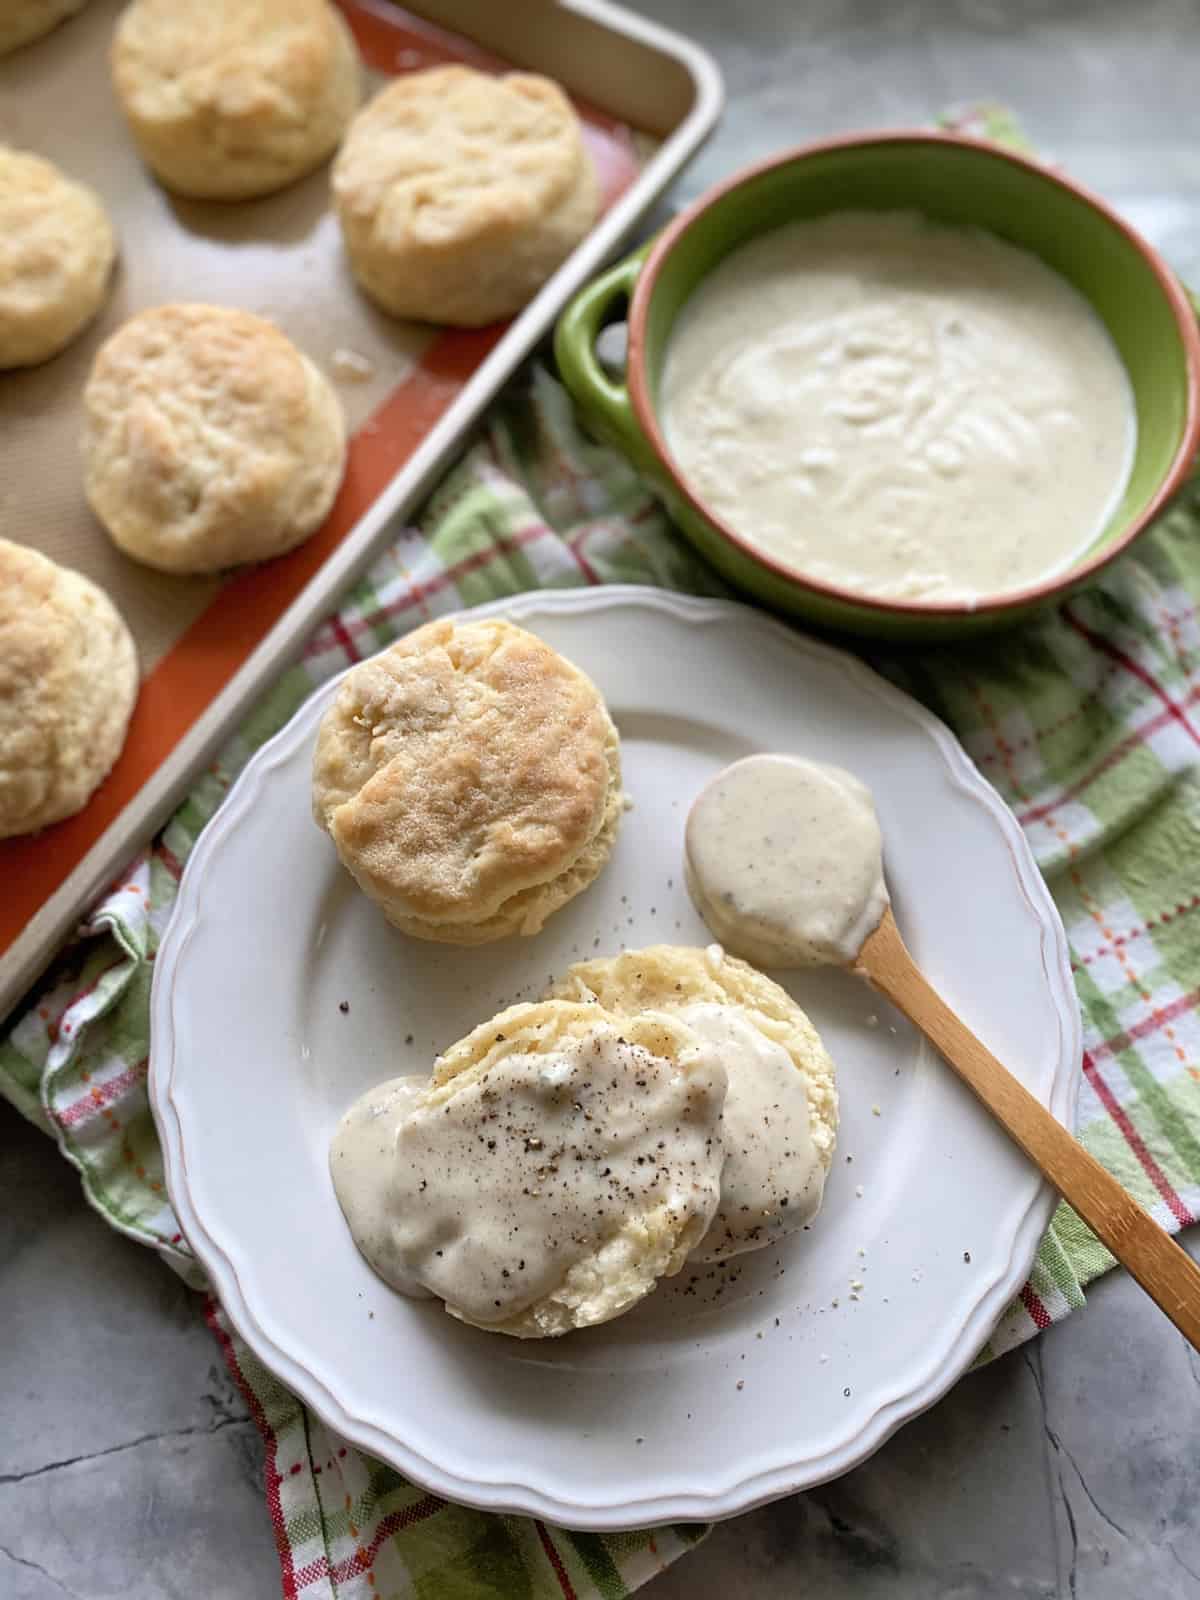 Top view of a white plate filled with biscuits and gravy with gravy and a tray of biscuits next to it.